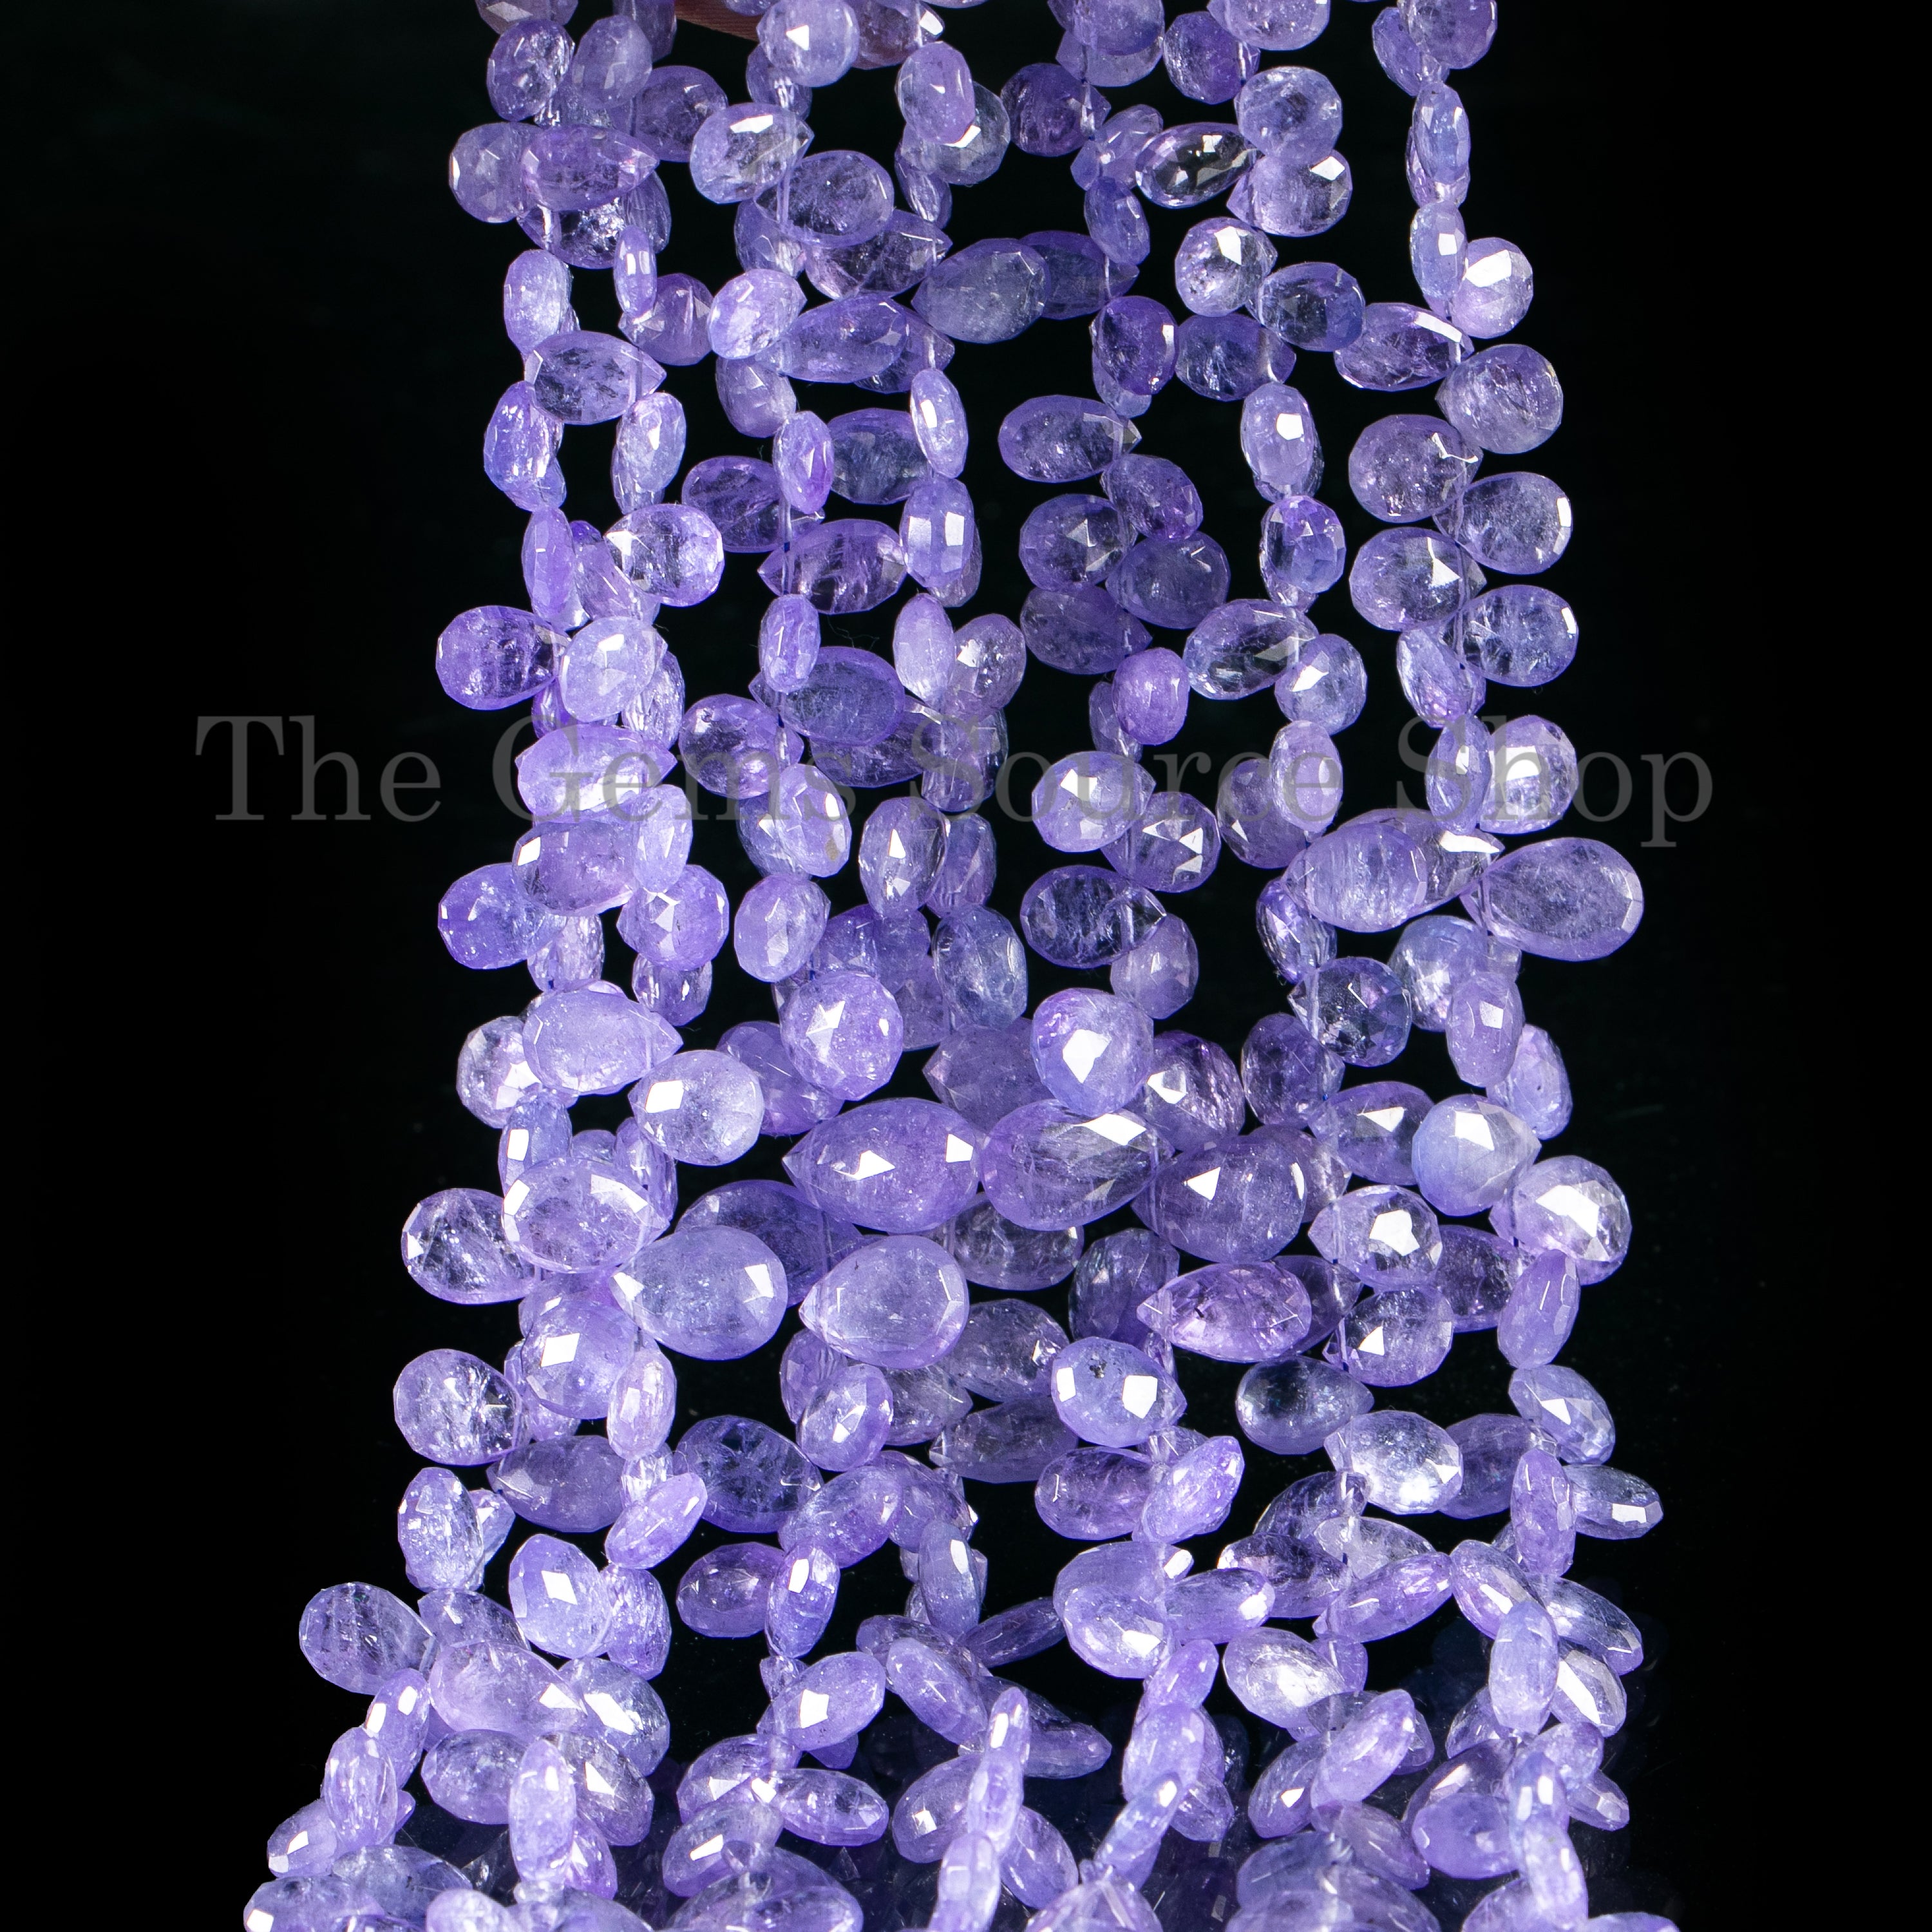 4x6-7x12 mm Tanzanite Faceted Pear Shape Gemstone Beads TGS-4700